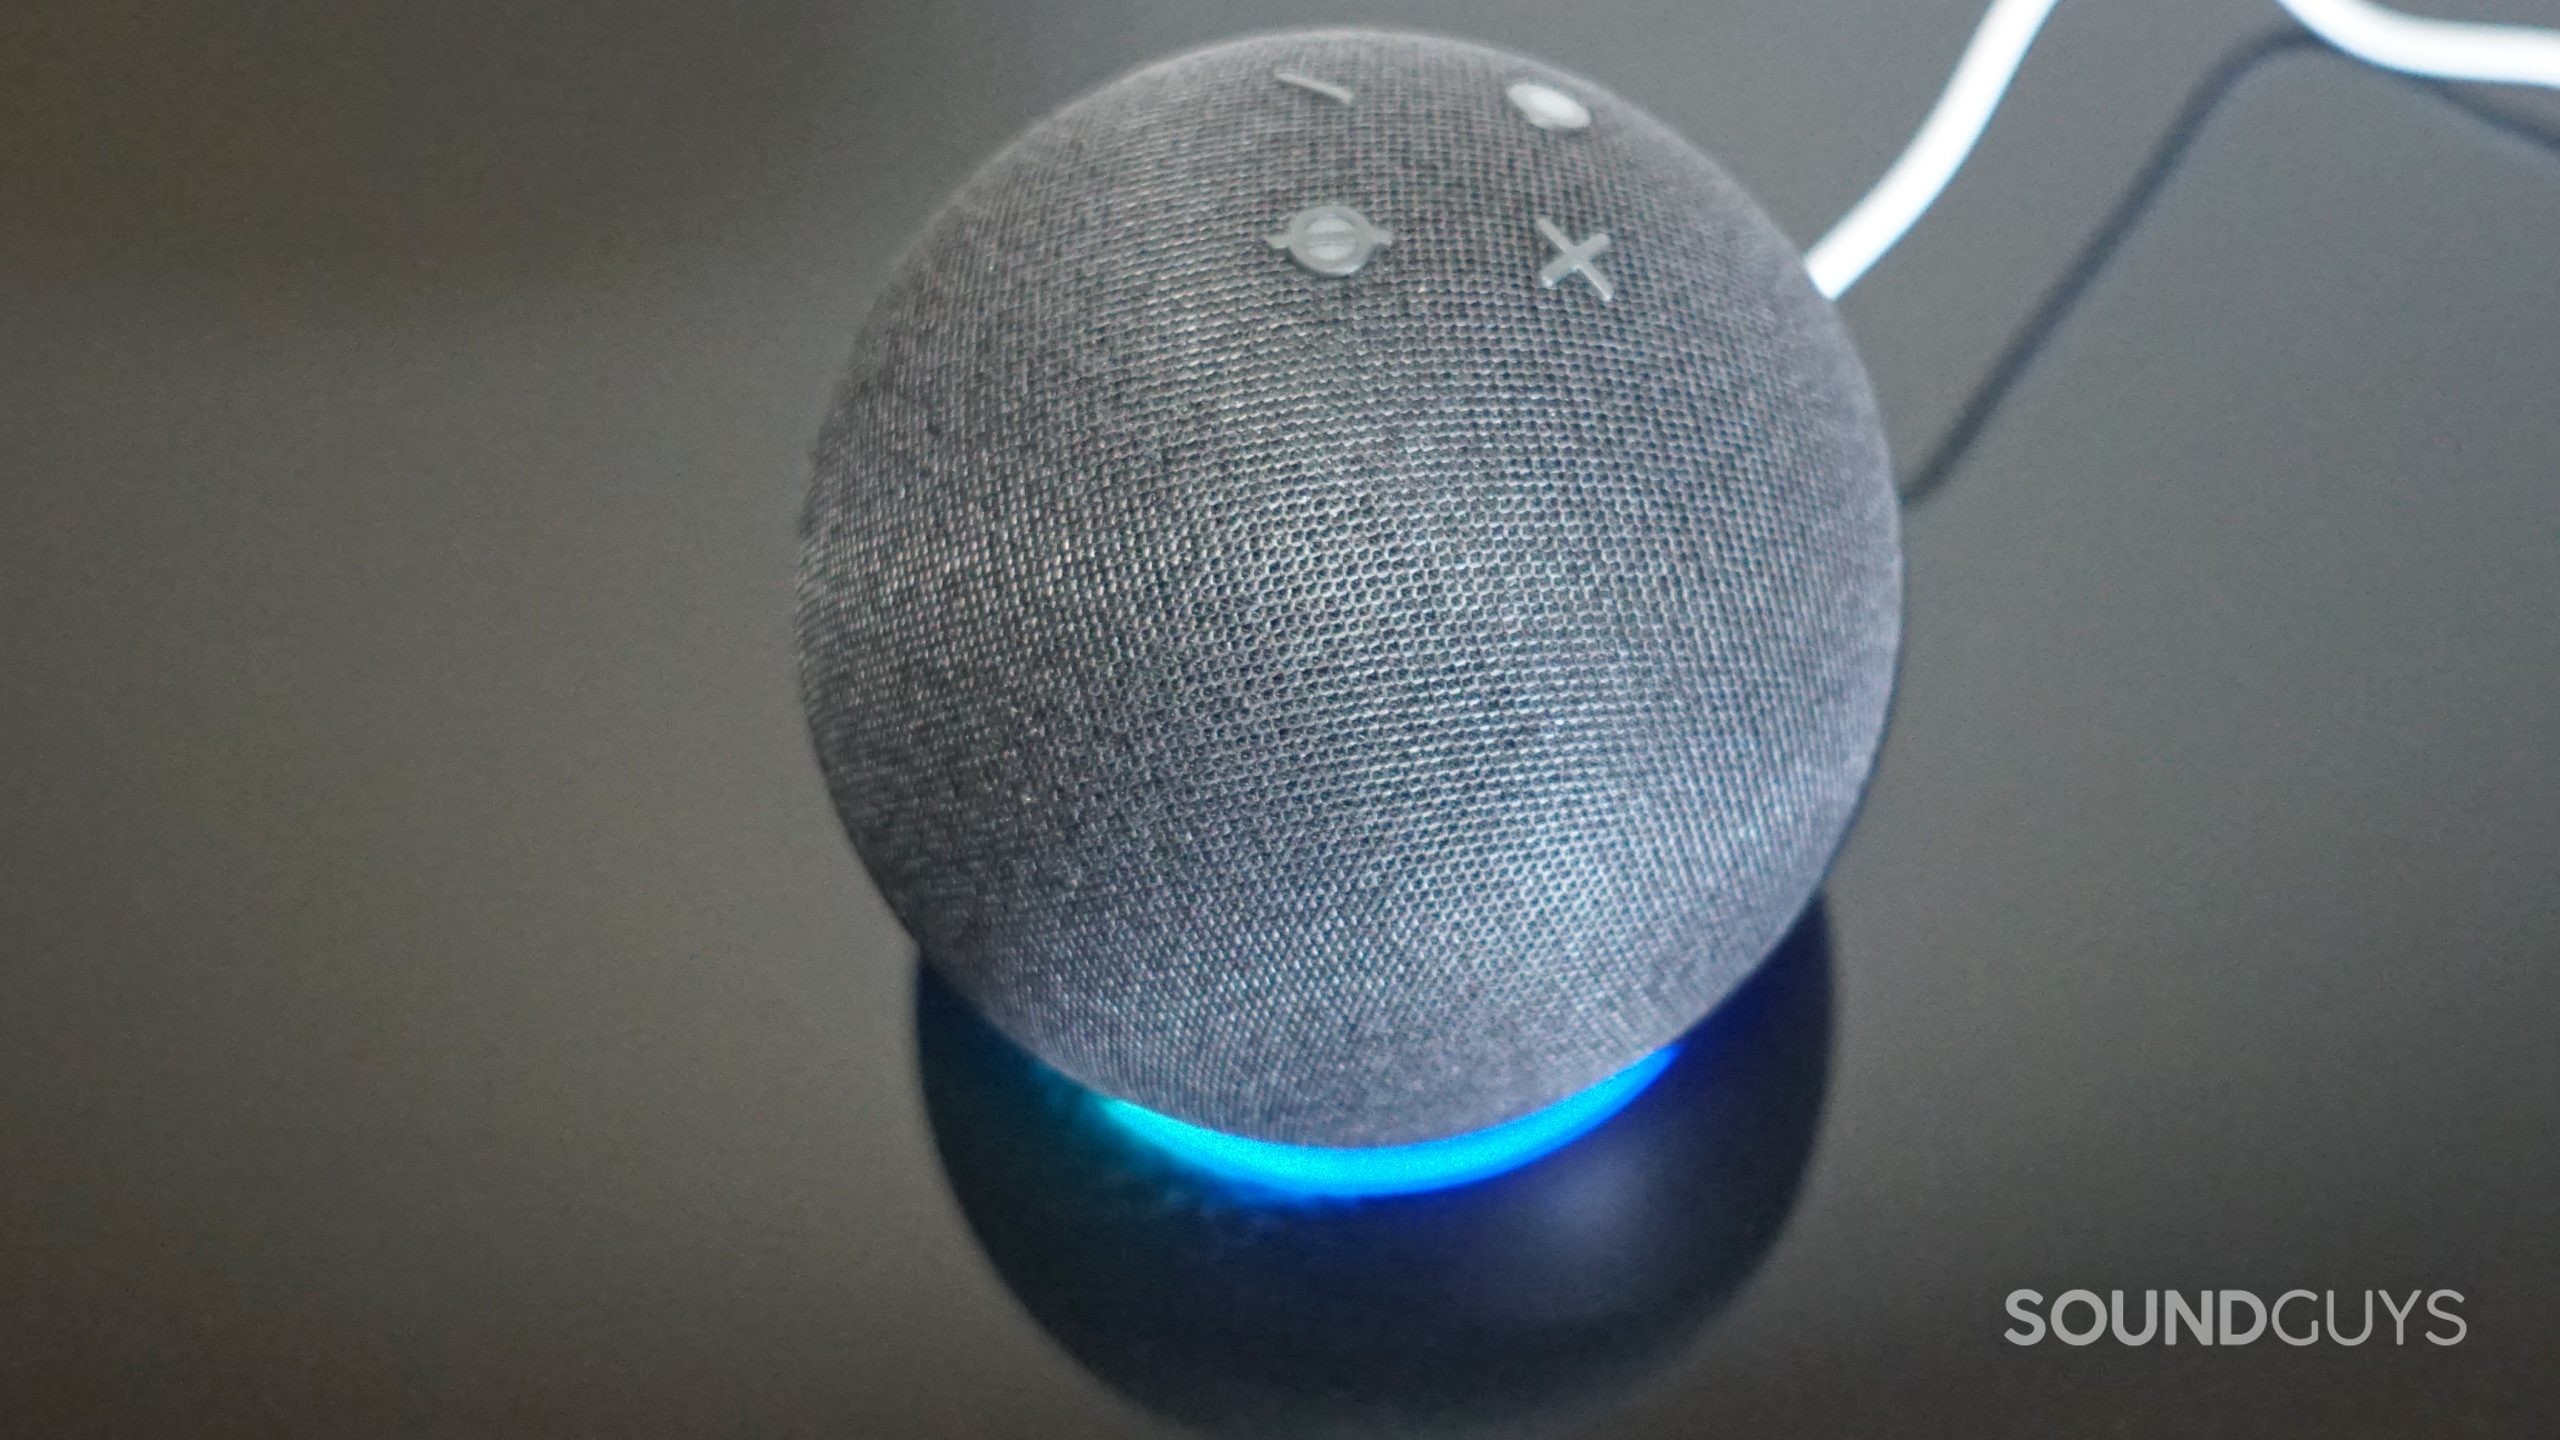 The Amazon Echo Dot (5th Gen) sits on a reflective black surface with its LED light turned.